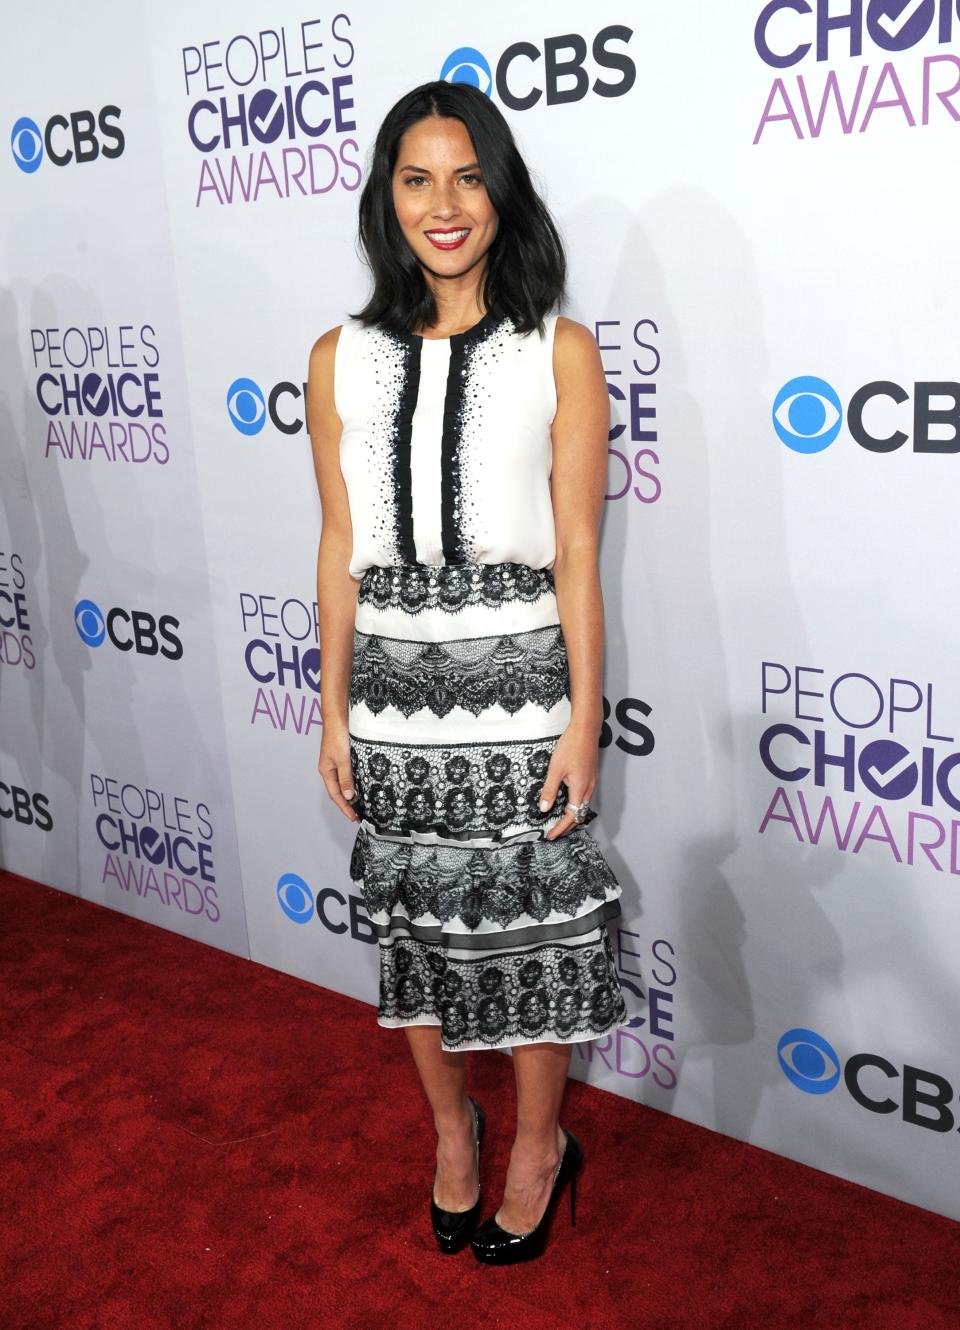 LOS ANGELES, CA - JANUARY 09: Actress Olivia Munn attends the 34th Annual People's Choice Awards at Nokia Theatre L.A. Live on January 9, 2013 in Los Angeles, California. (Photo by Michael Buckner/Getty Images for PCA)